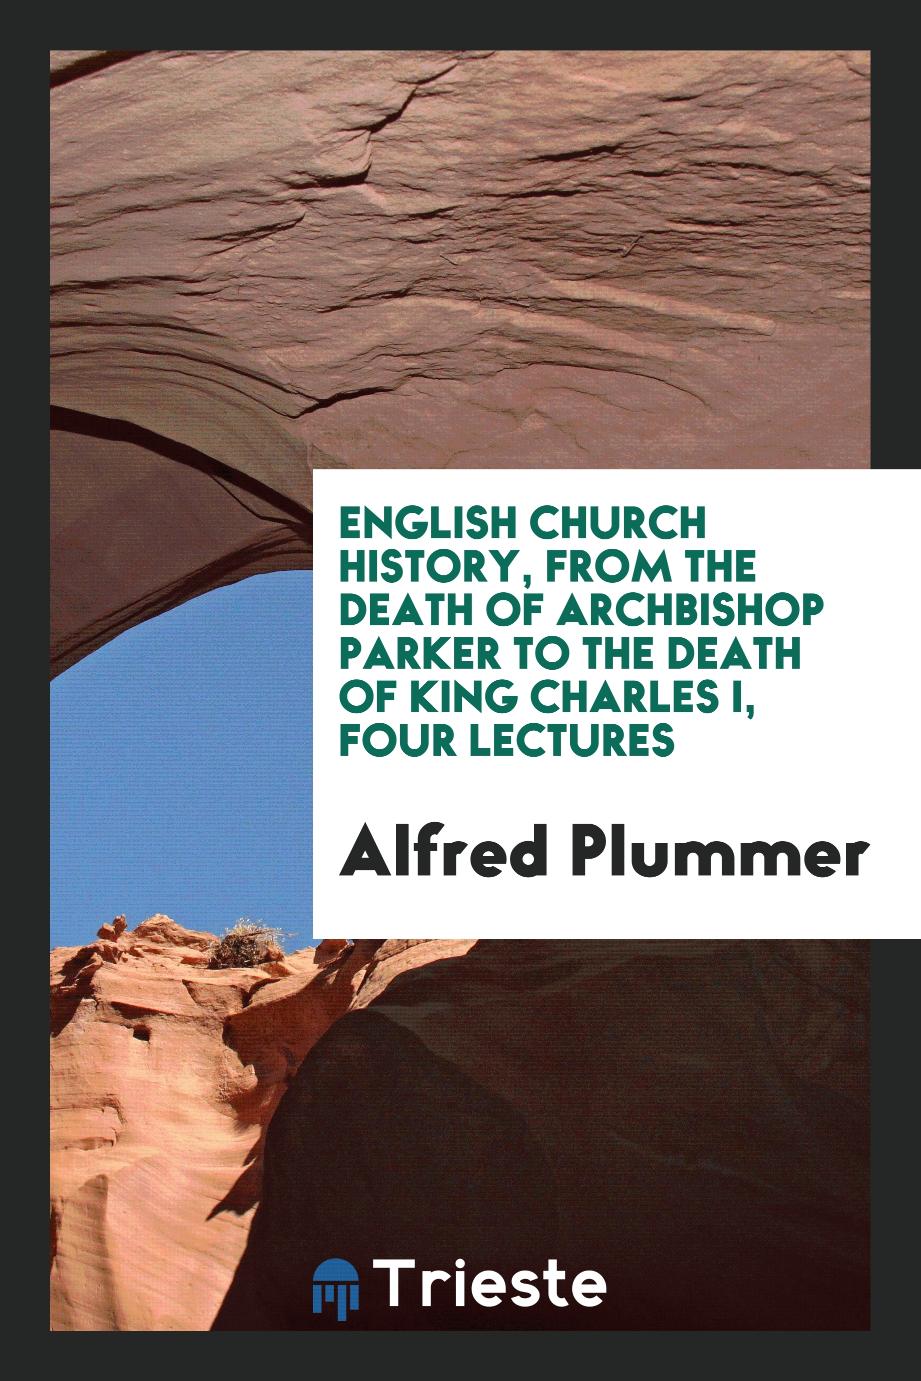 English church history, from the death of Archbishop Parker to the death of King Charles I, four lectures